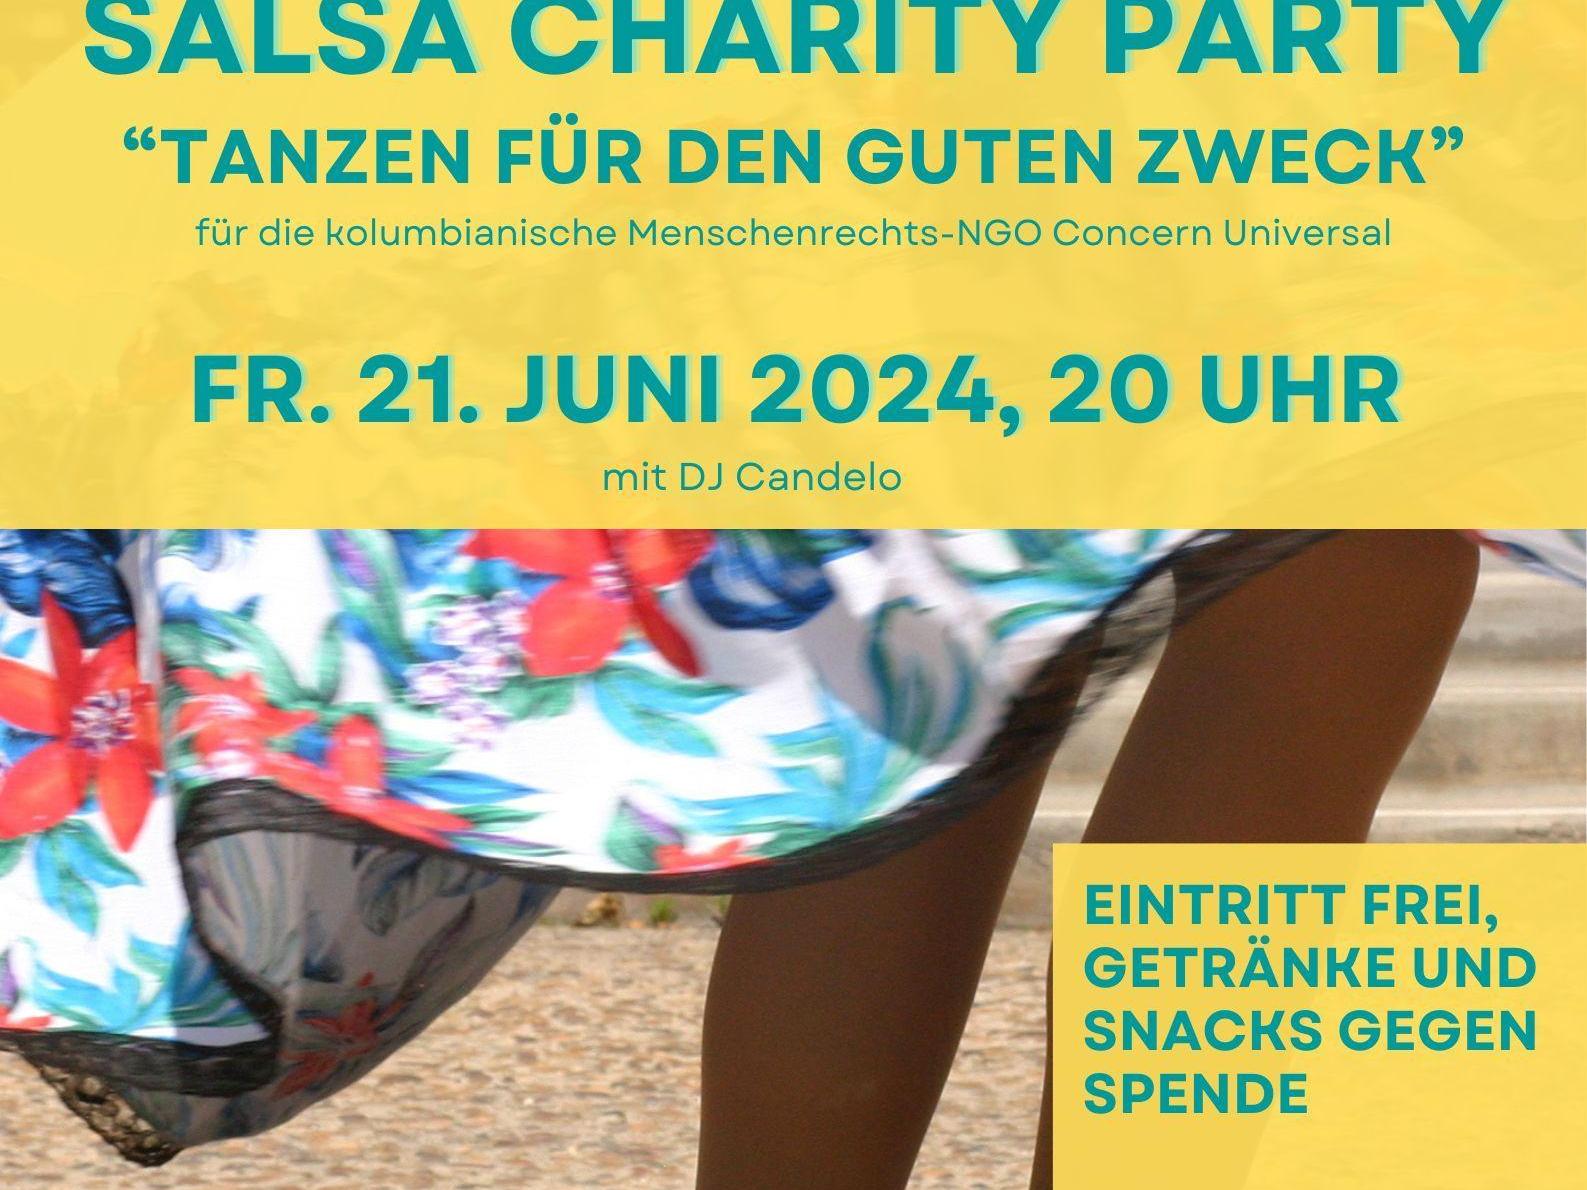 Salsa-Charity-Party